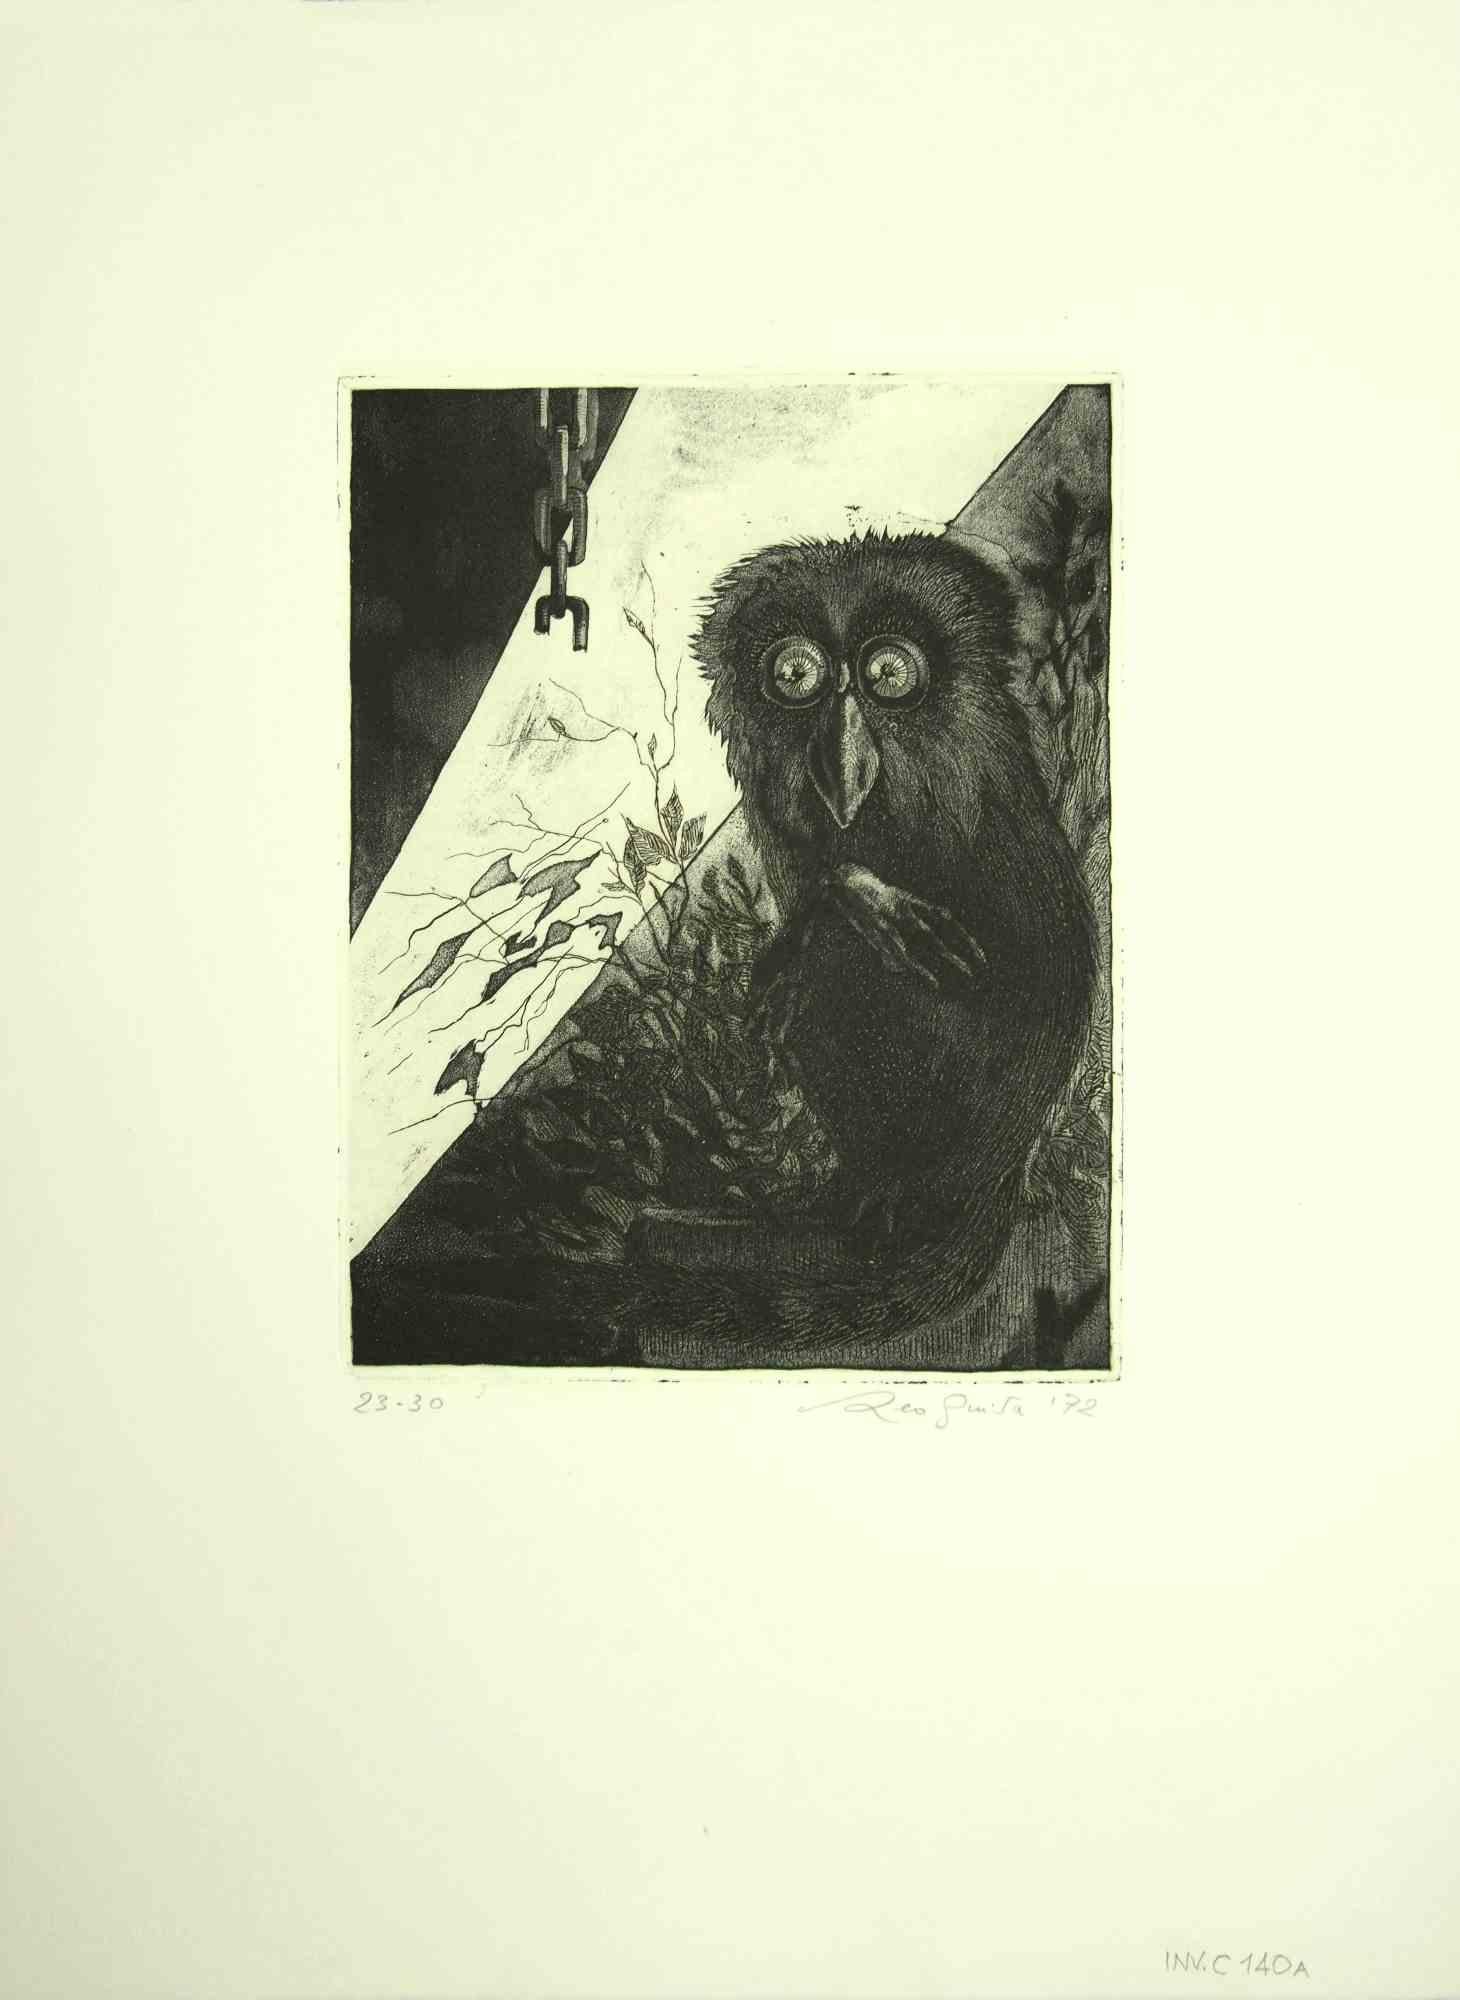 The owl is an original etching print realized by Leo Guida in 1972.

From the edition of 30 prints.

Good condition.
 
Leo Guida  (1992 - 2017). Sensitive to current issues, artistic movements and historical techniques, Leo Guida has been able to